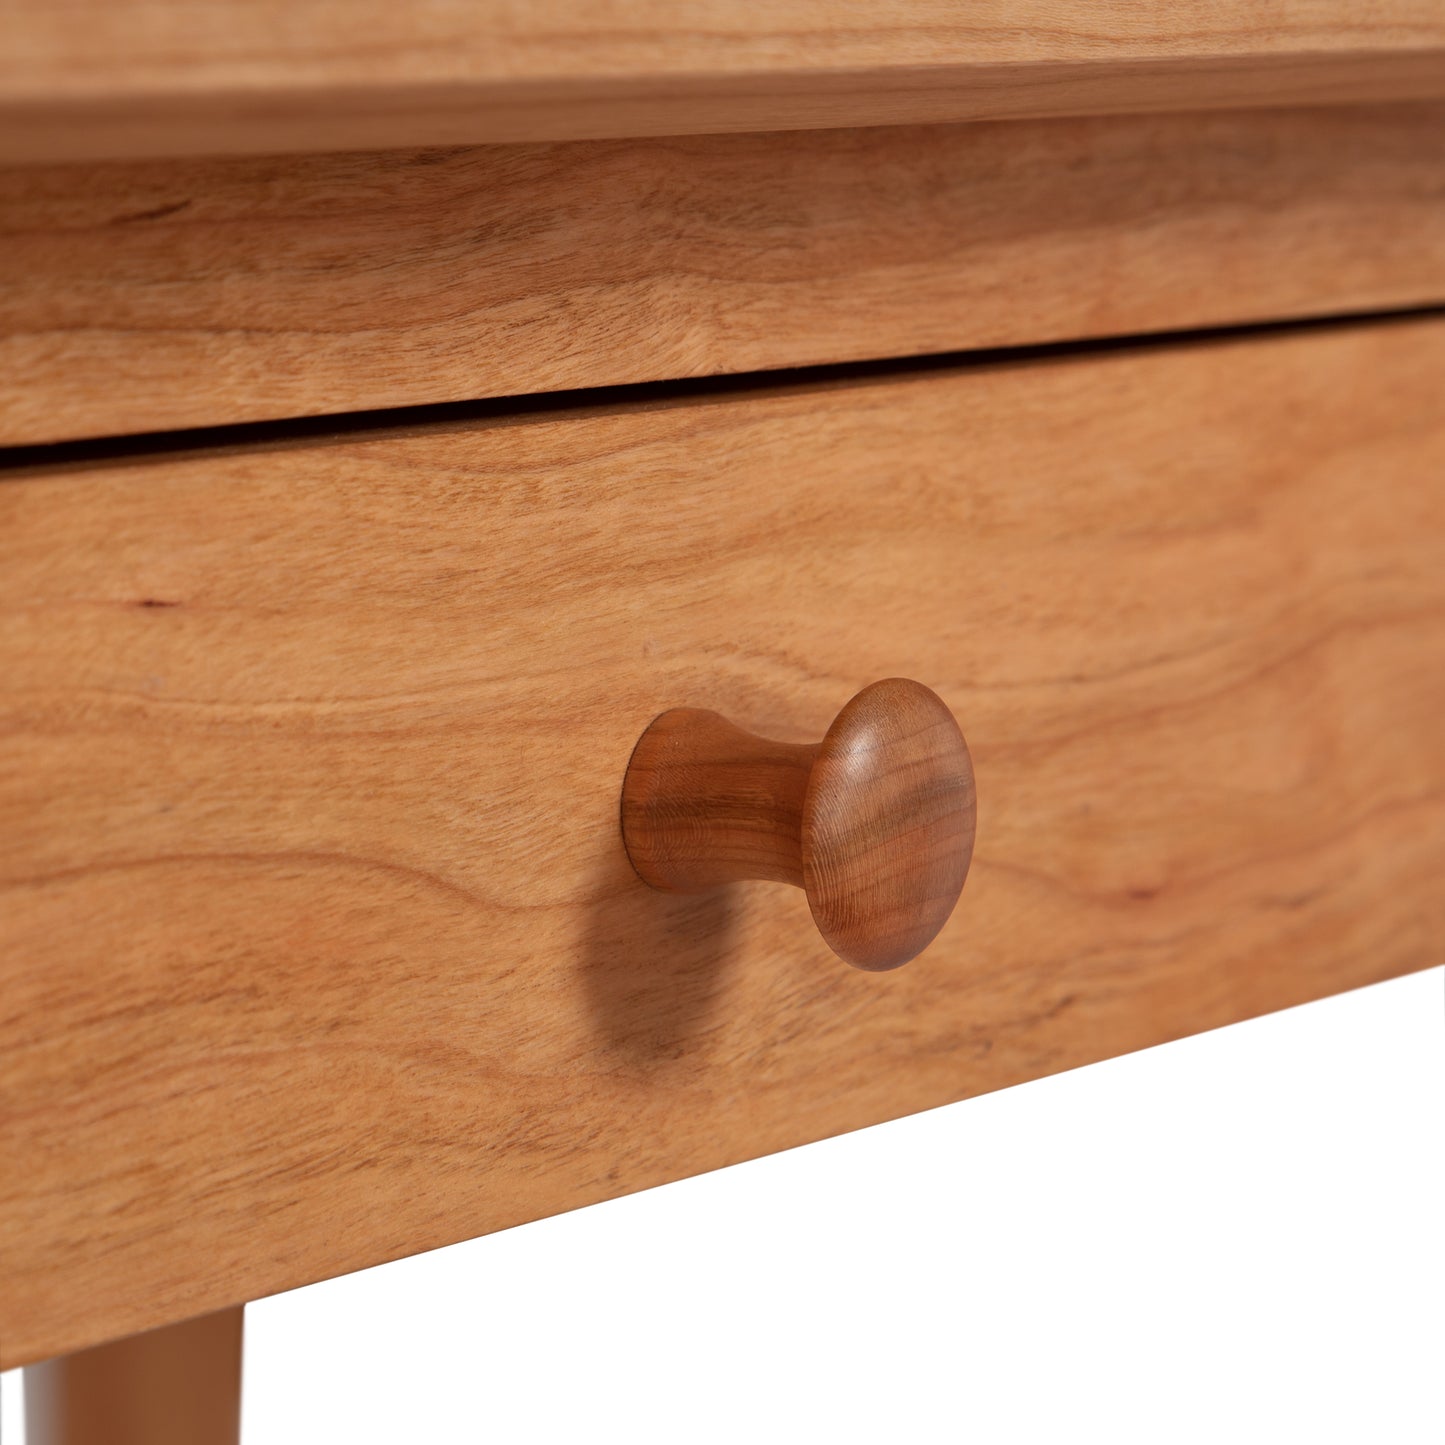 Close-up of a wooden drawer with a round knob on a Maple Corner Woodworks American Shaker Writing Desk, crafted by Vermont craftsmen from sustainably harvested hardwood.